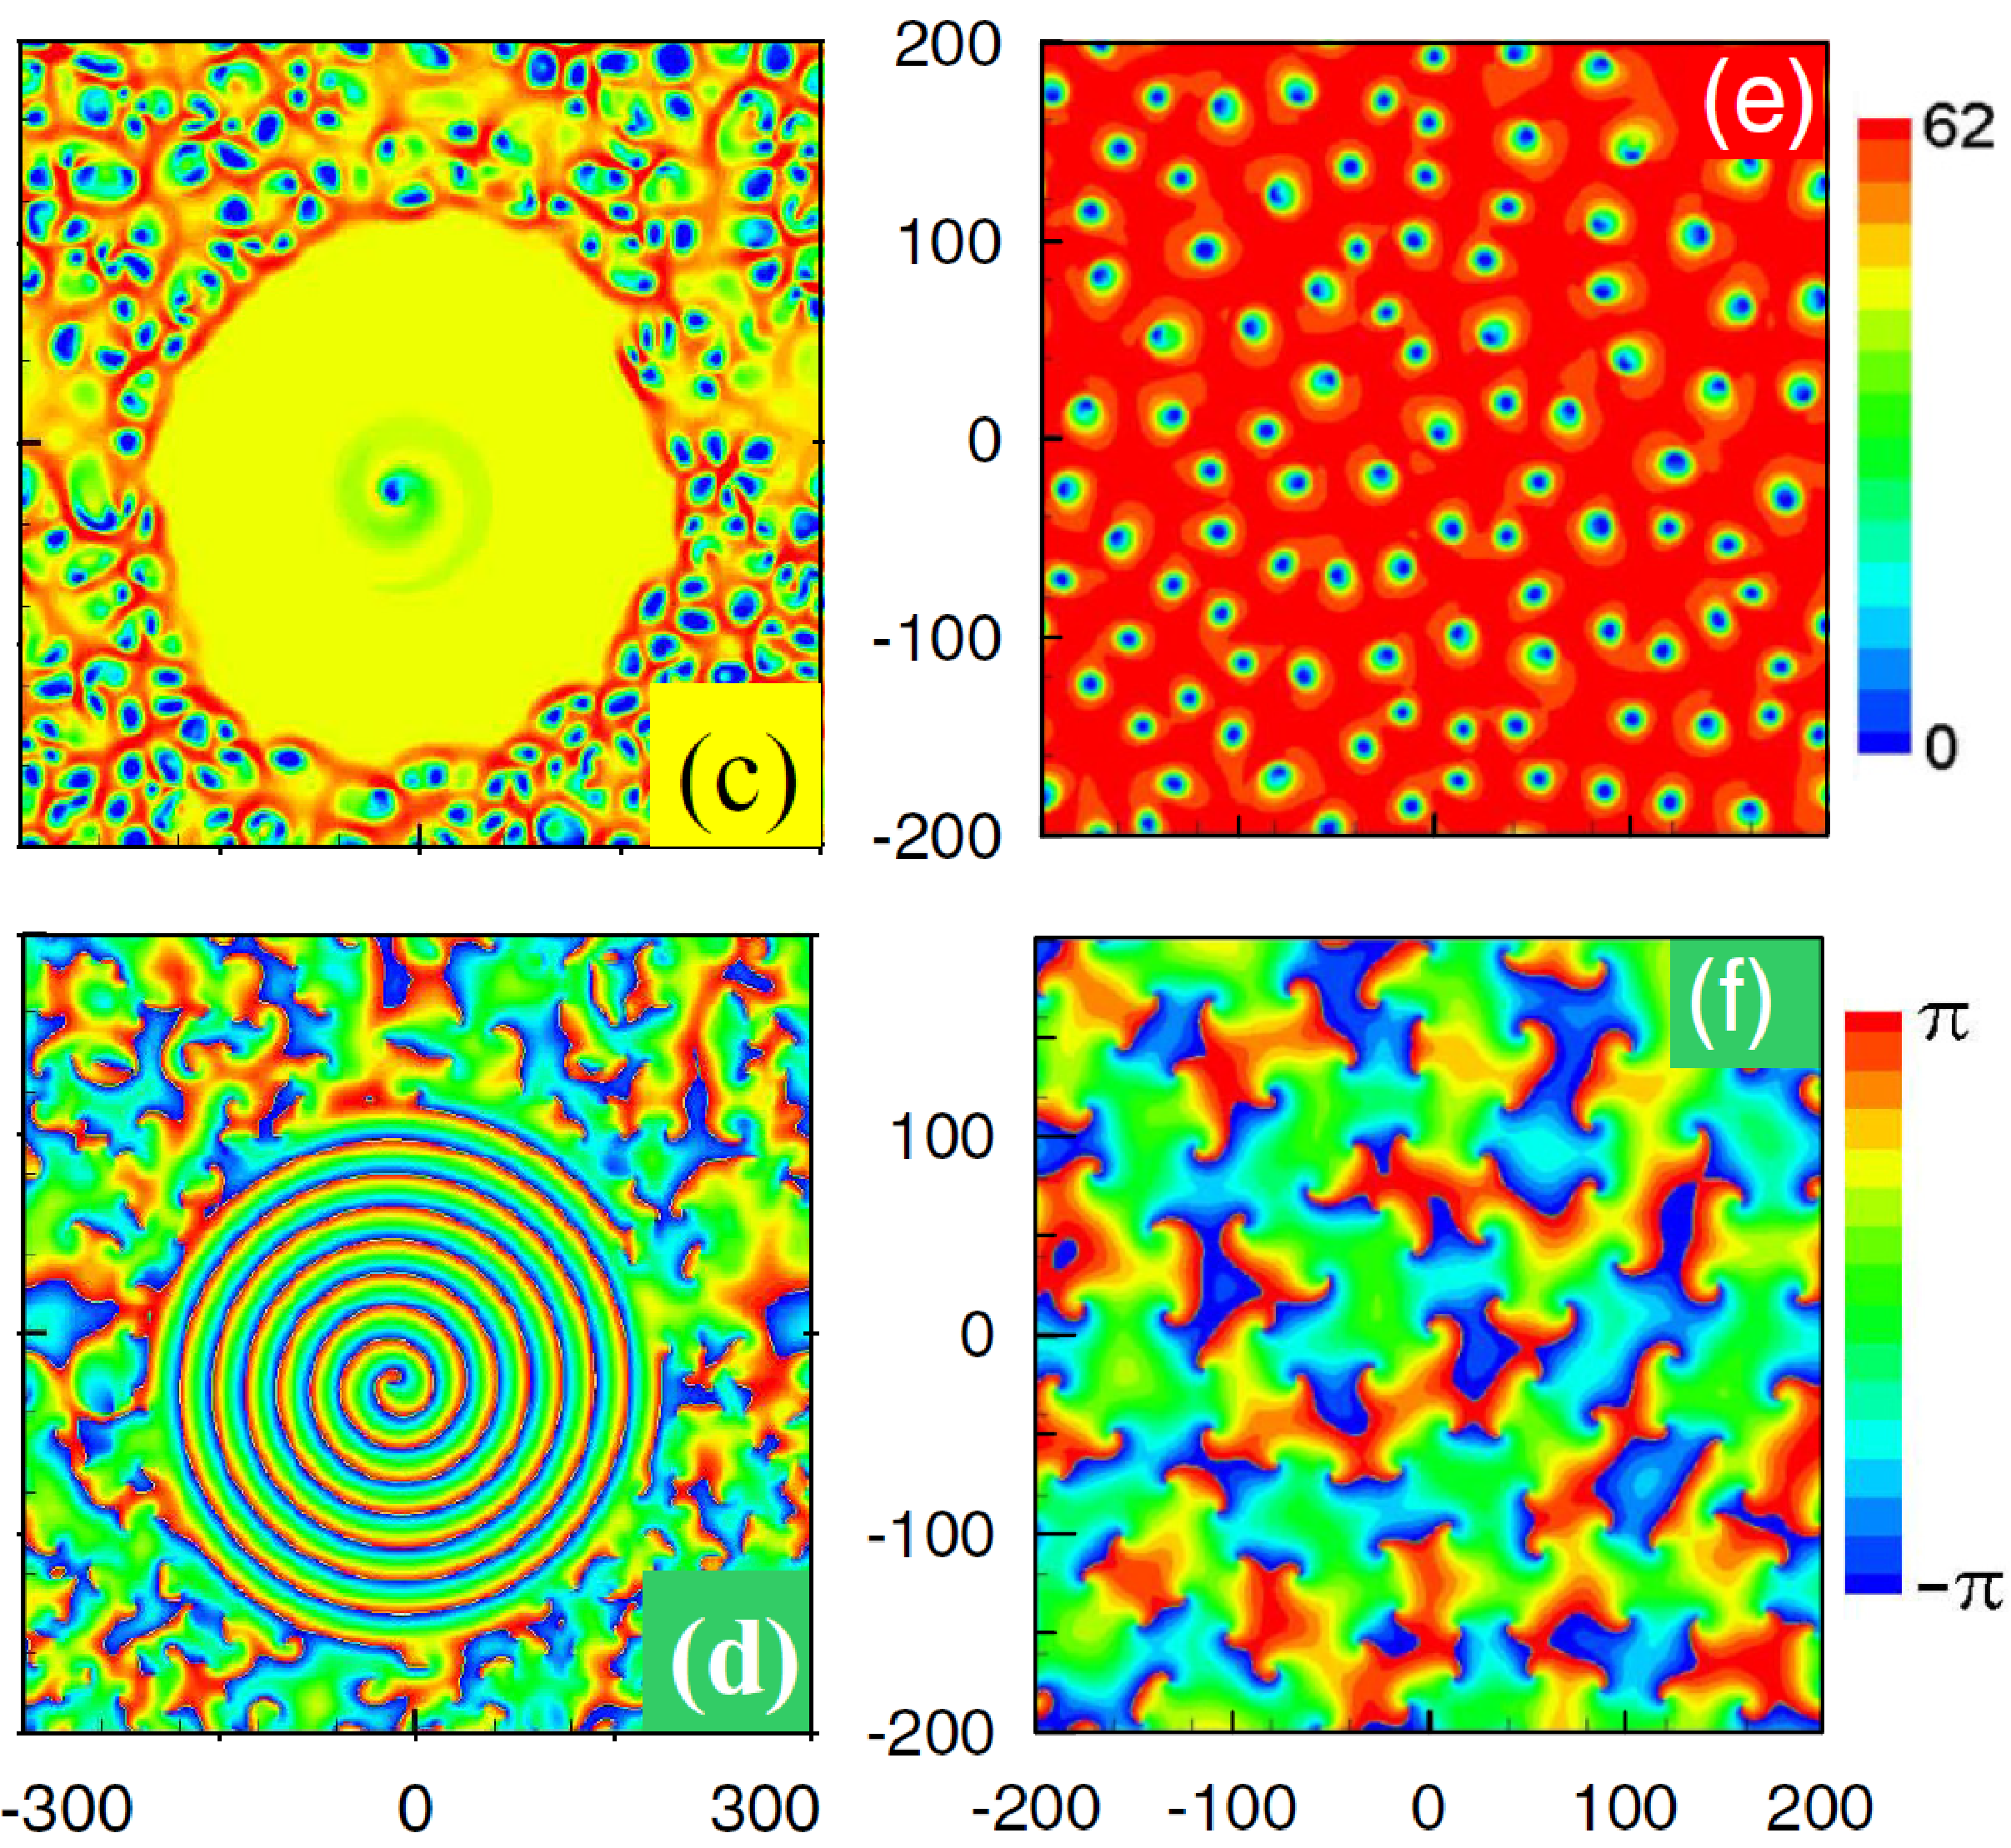 Polariton instability-induced textures and vortices